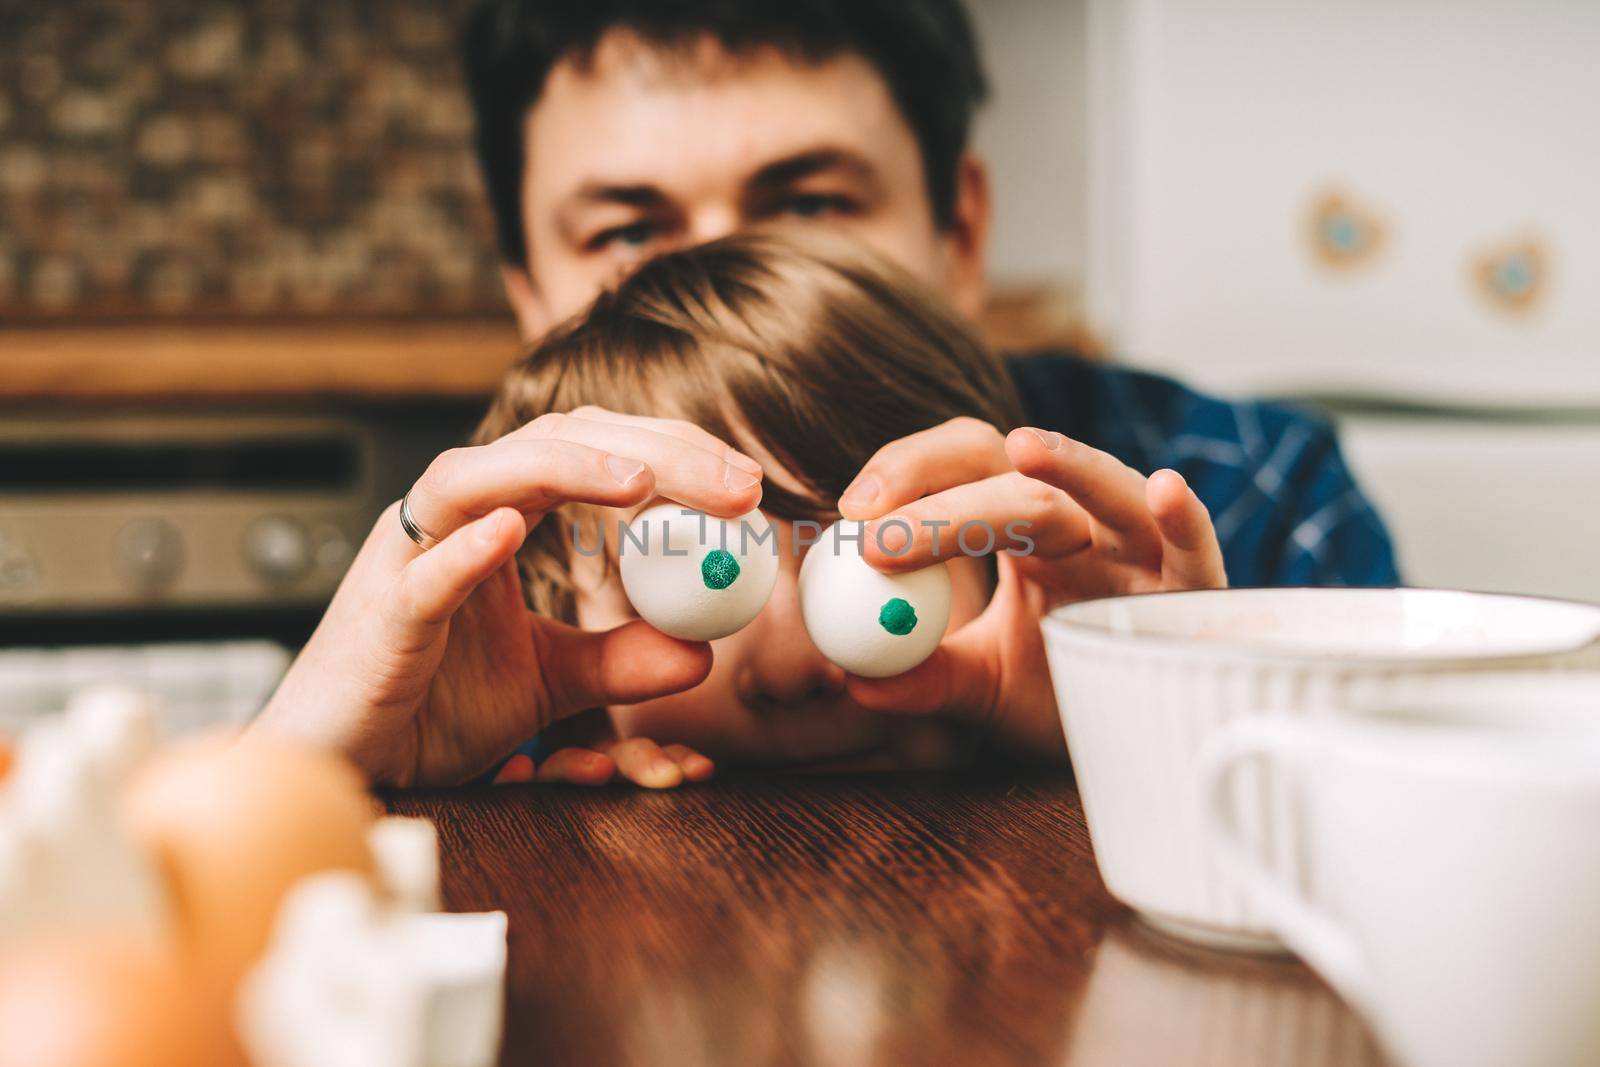 Easter day with kid. Father and son with funny face and eggs eyes, having fun together. Family man and child in a kitchen. Preparing for Easter, creative homemade decoration.